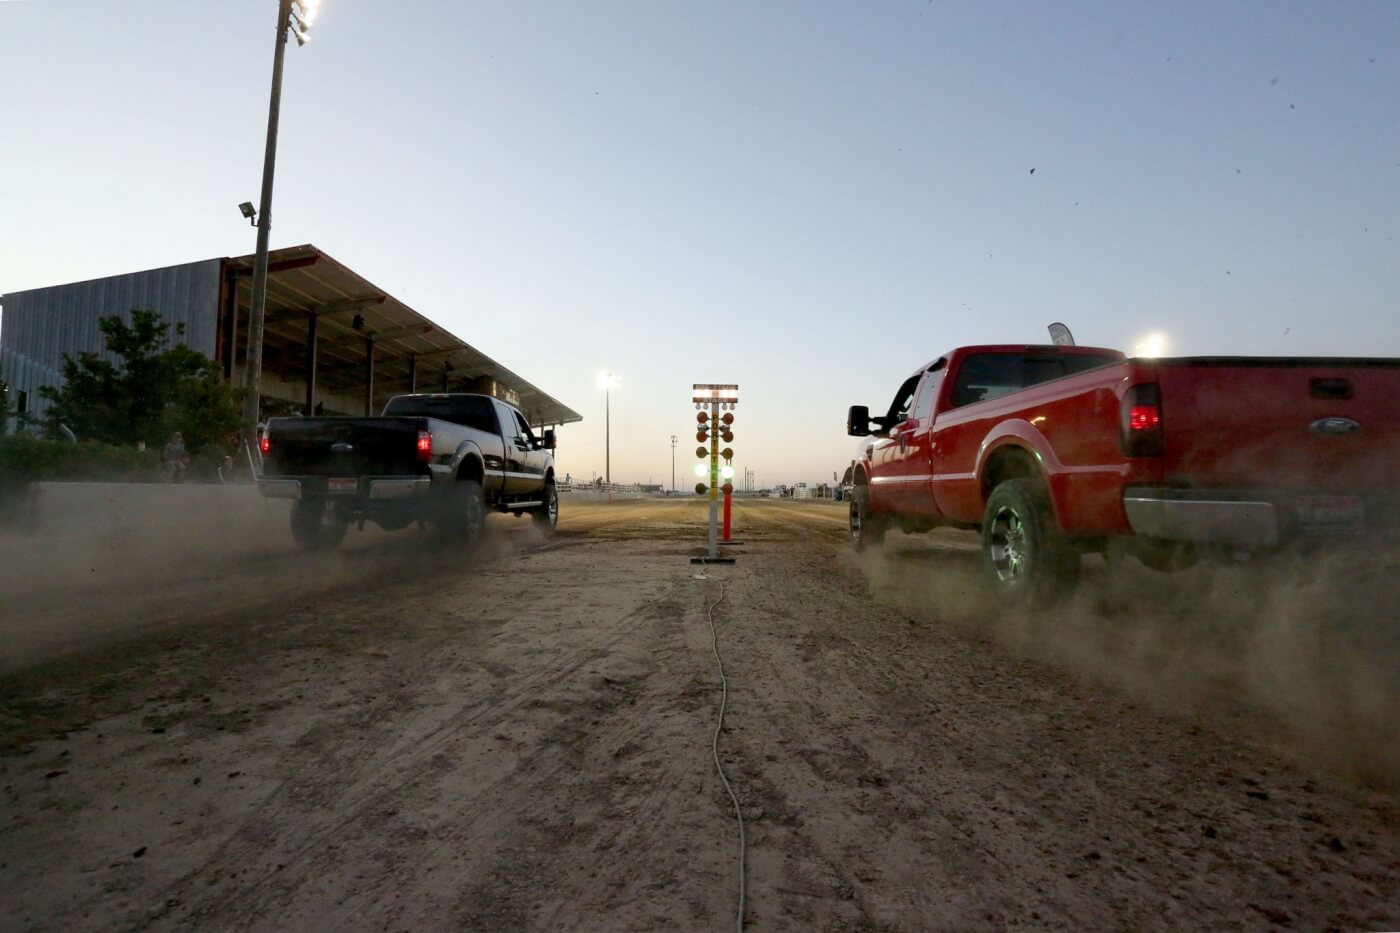 The Dog Days Dirt Drags have become a staple at the event and are always a crowd favorite. If you think 500+ horsepower on asphalt is fun, try it on the dirt when traction is limited—this is where true driving skills really shine.